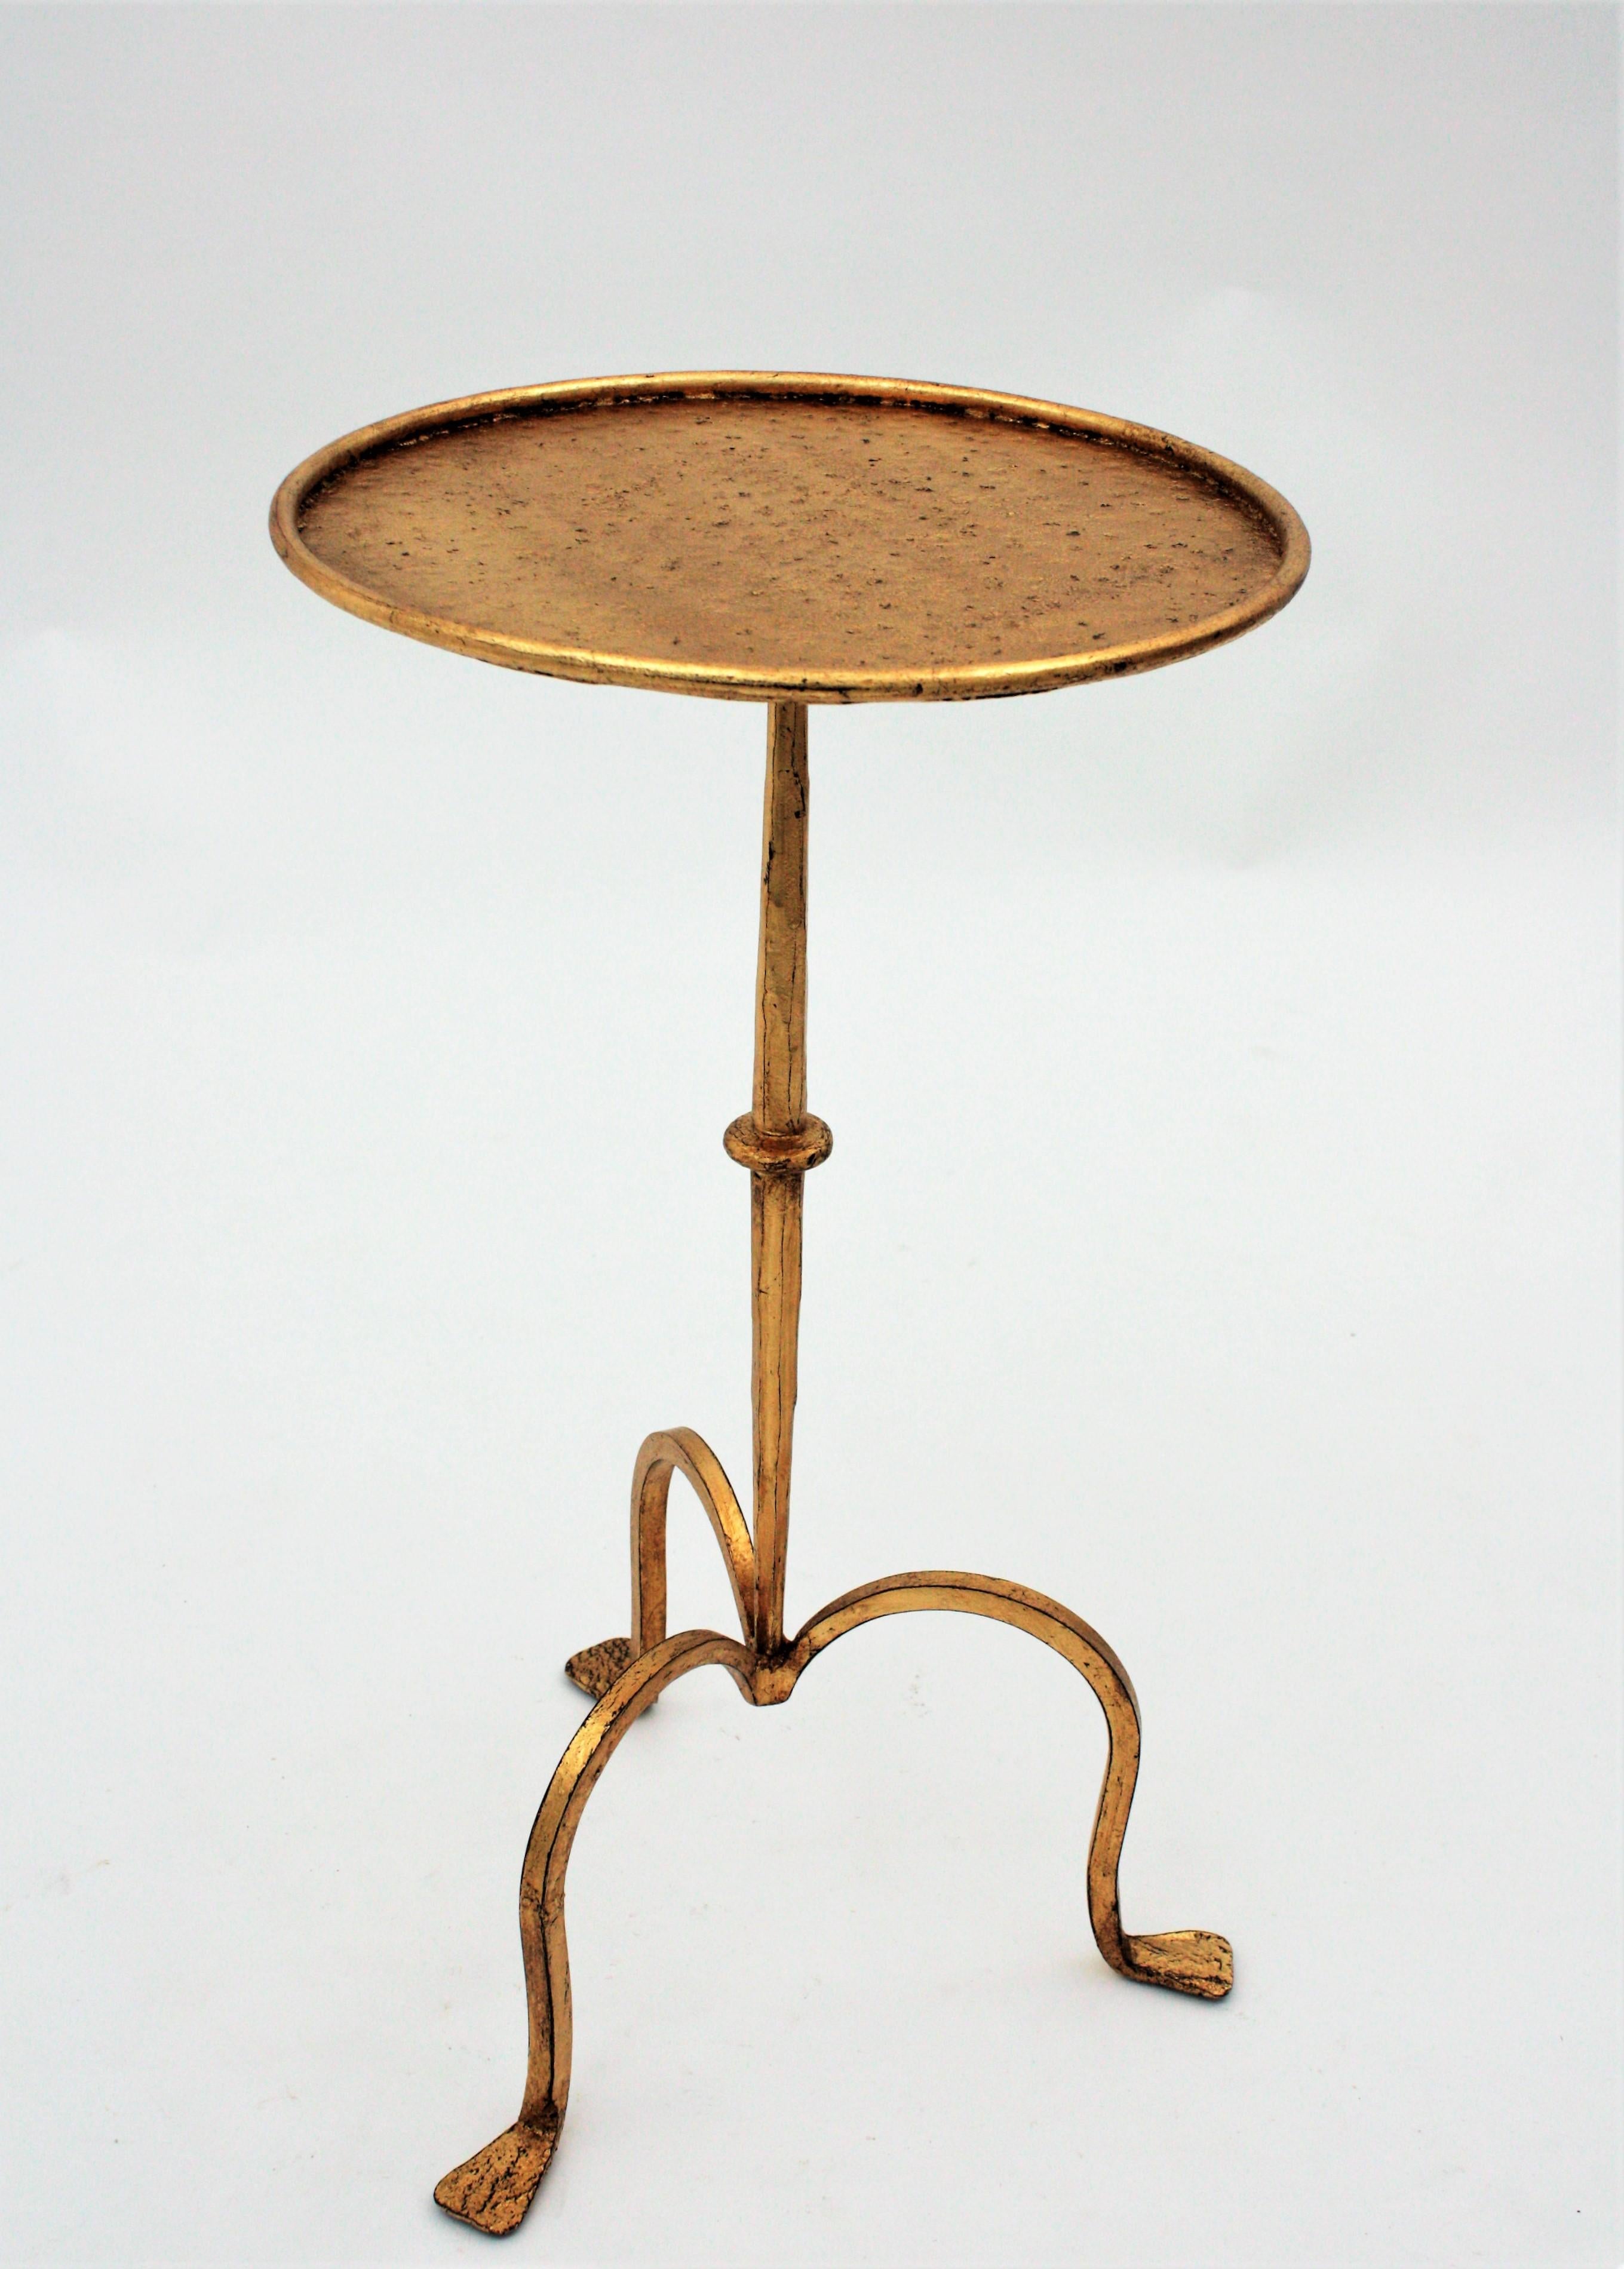 20th Century Spanish Large Wrought Gilt Iron Gueridon Drinks Table, Side Table or Pedestal